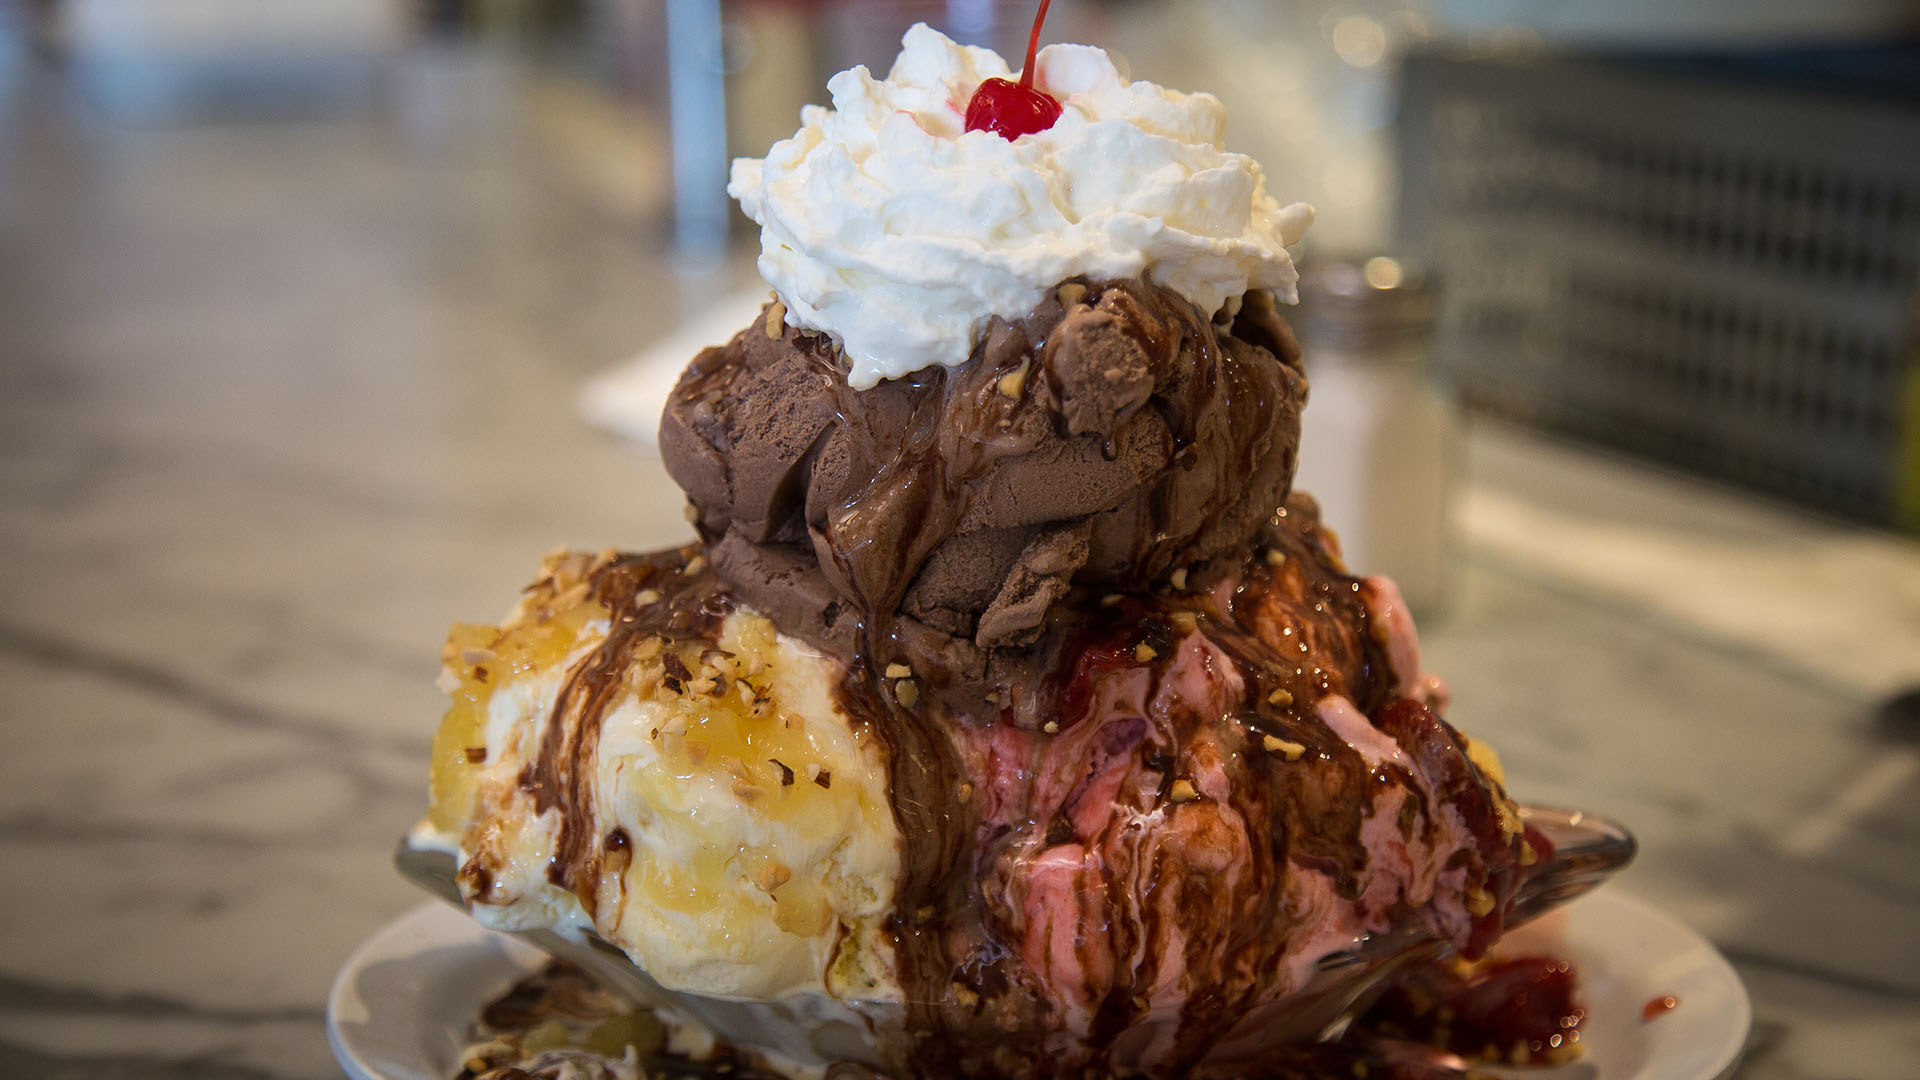 The Banana Special, a ripe banana, giant scoops of chocolate, strawberry, and vanilla ice creams with chocolate, strawberry, and pineapple sauce and whipped cream, almonds, and topped with a cherry. 